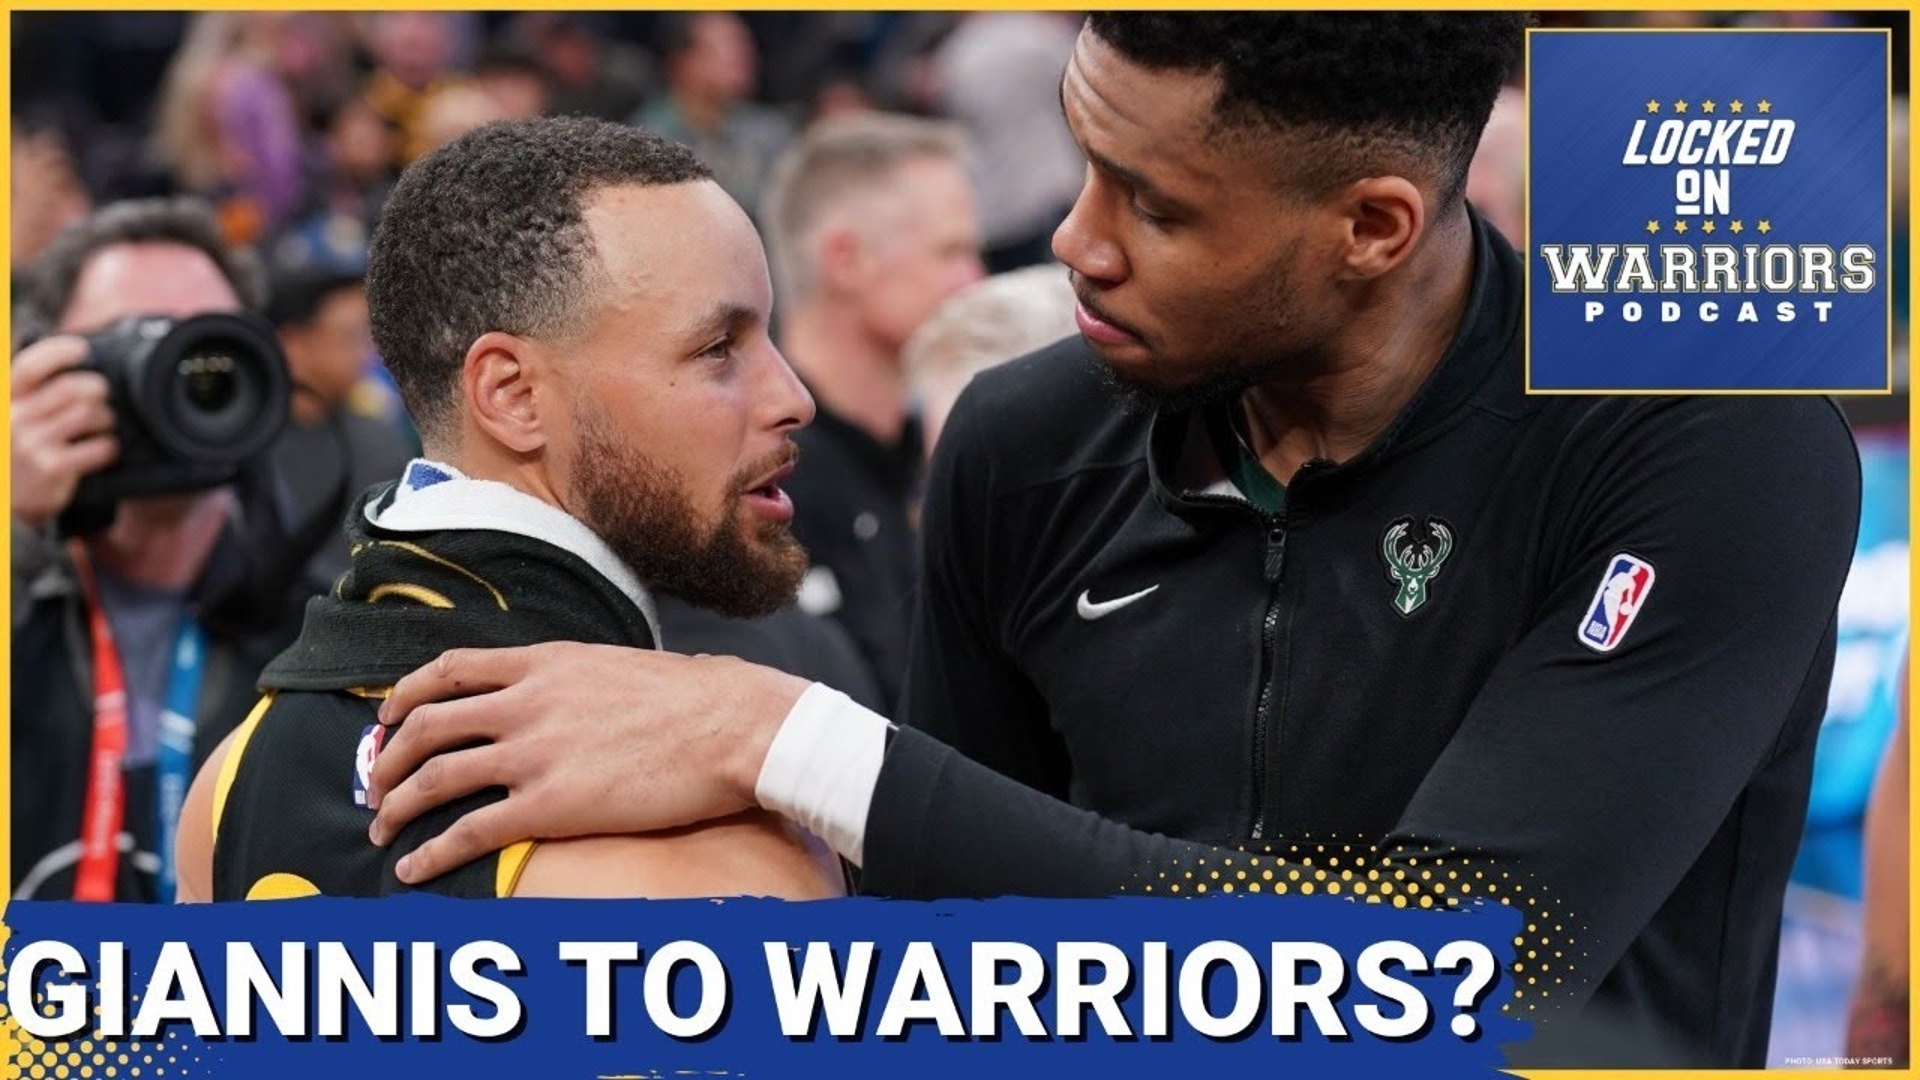 Cyrus Saatsaz continues reviewing the disappointing season that was for the Golden State Warriors.